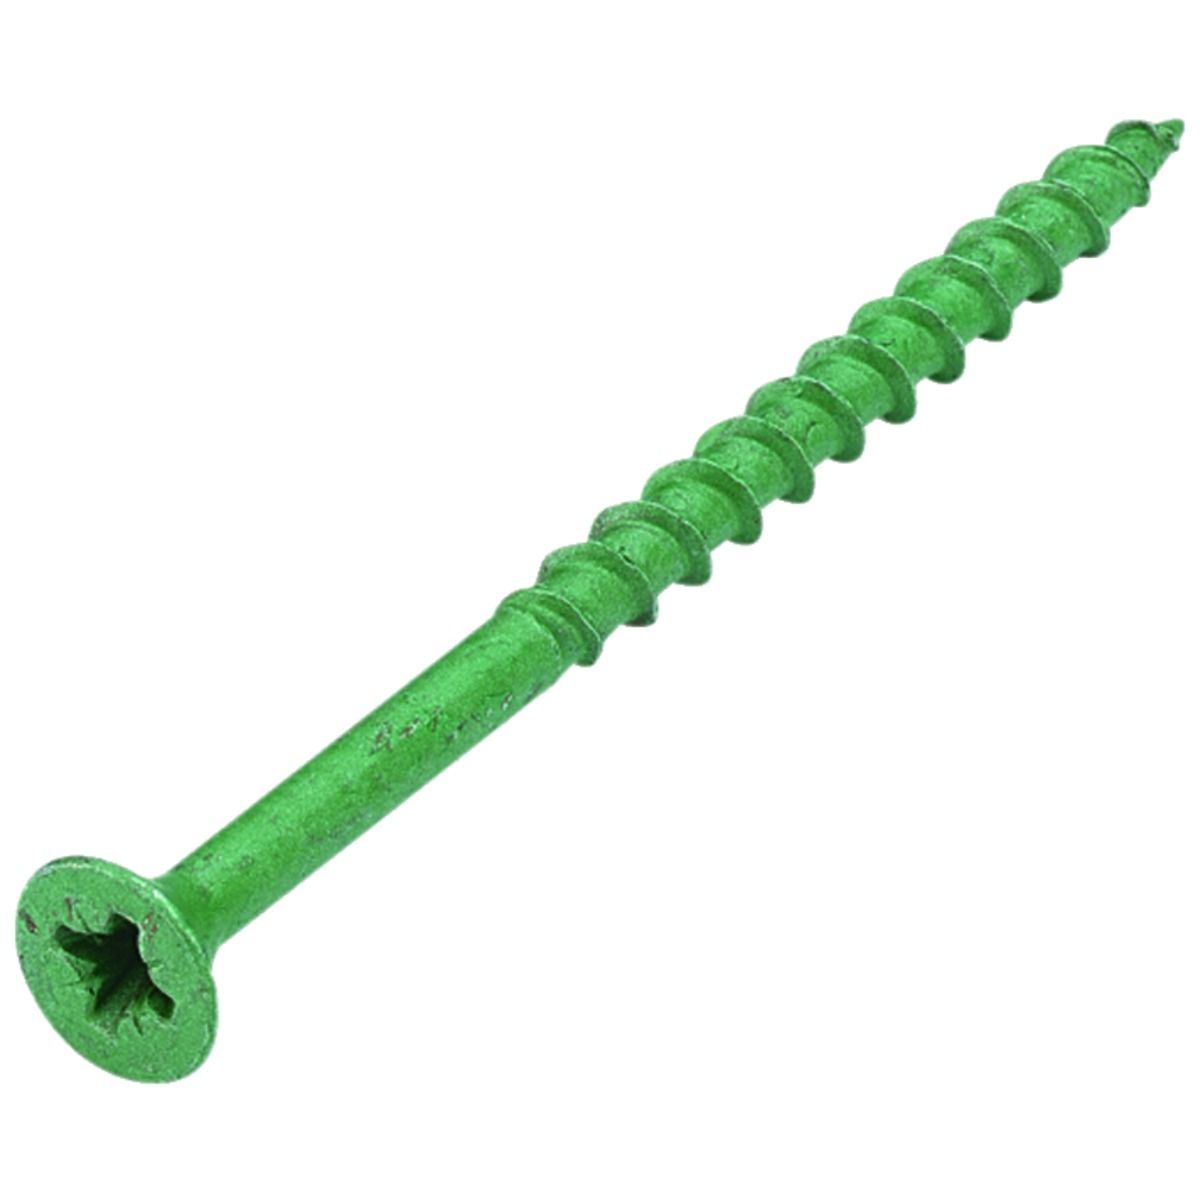 Image of Wickes External Grade Screws - Green No 10 x 76mm Pack of 100